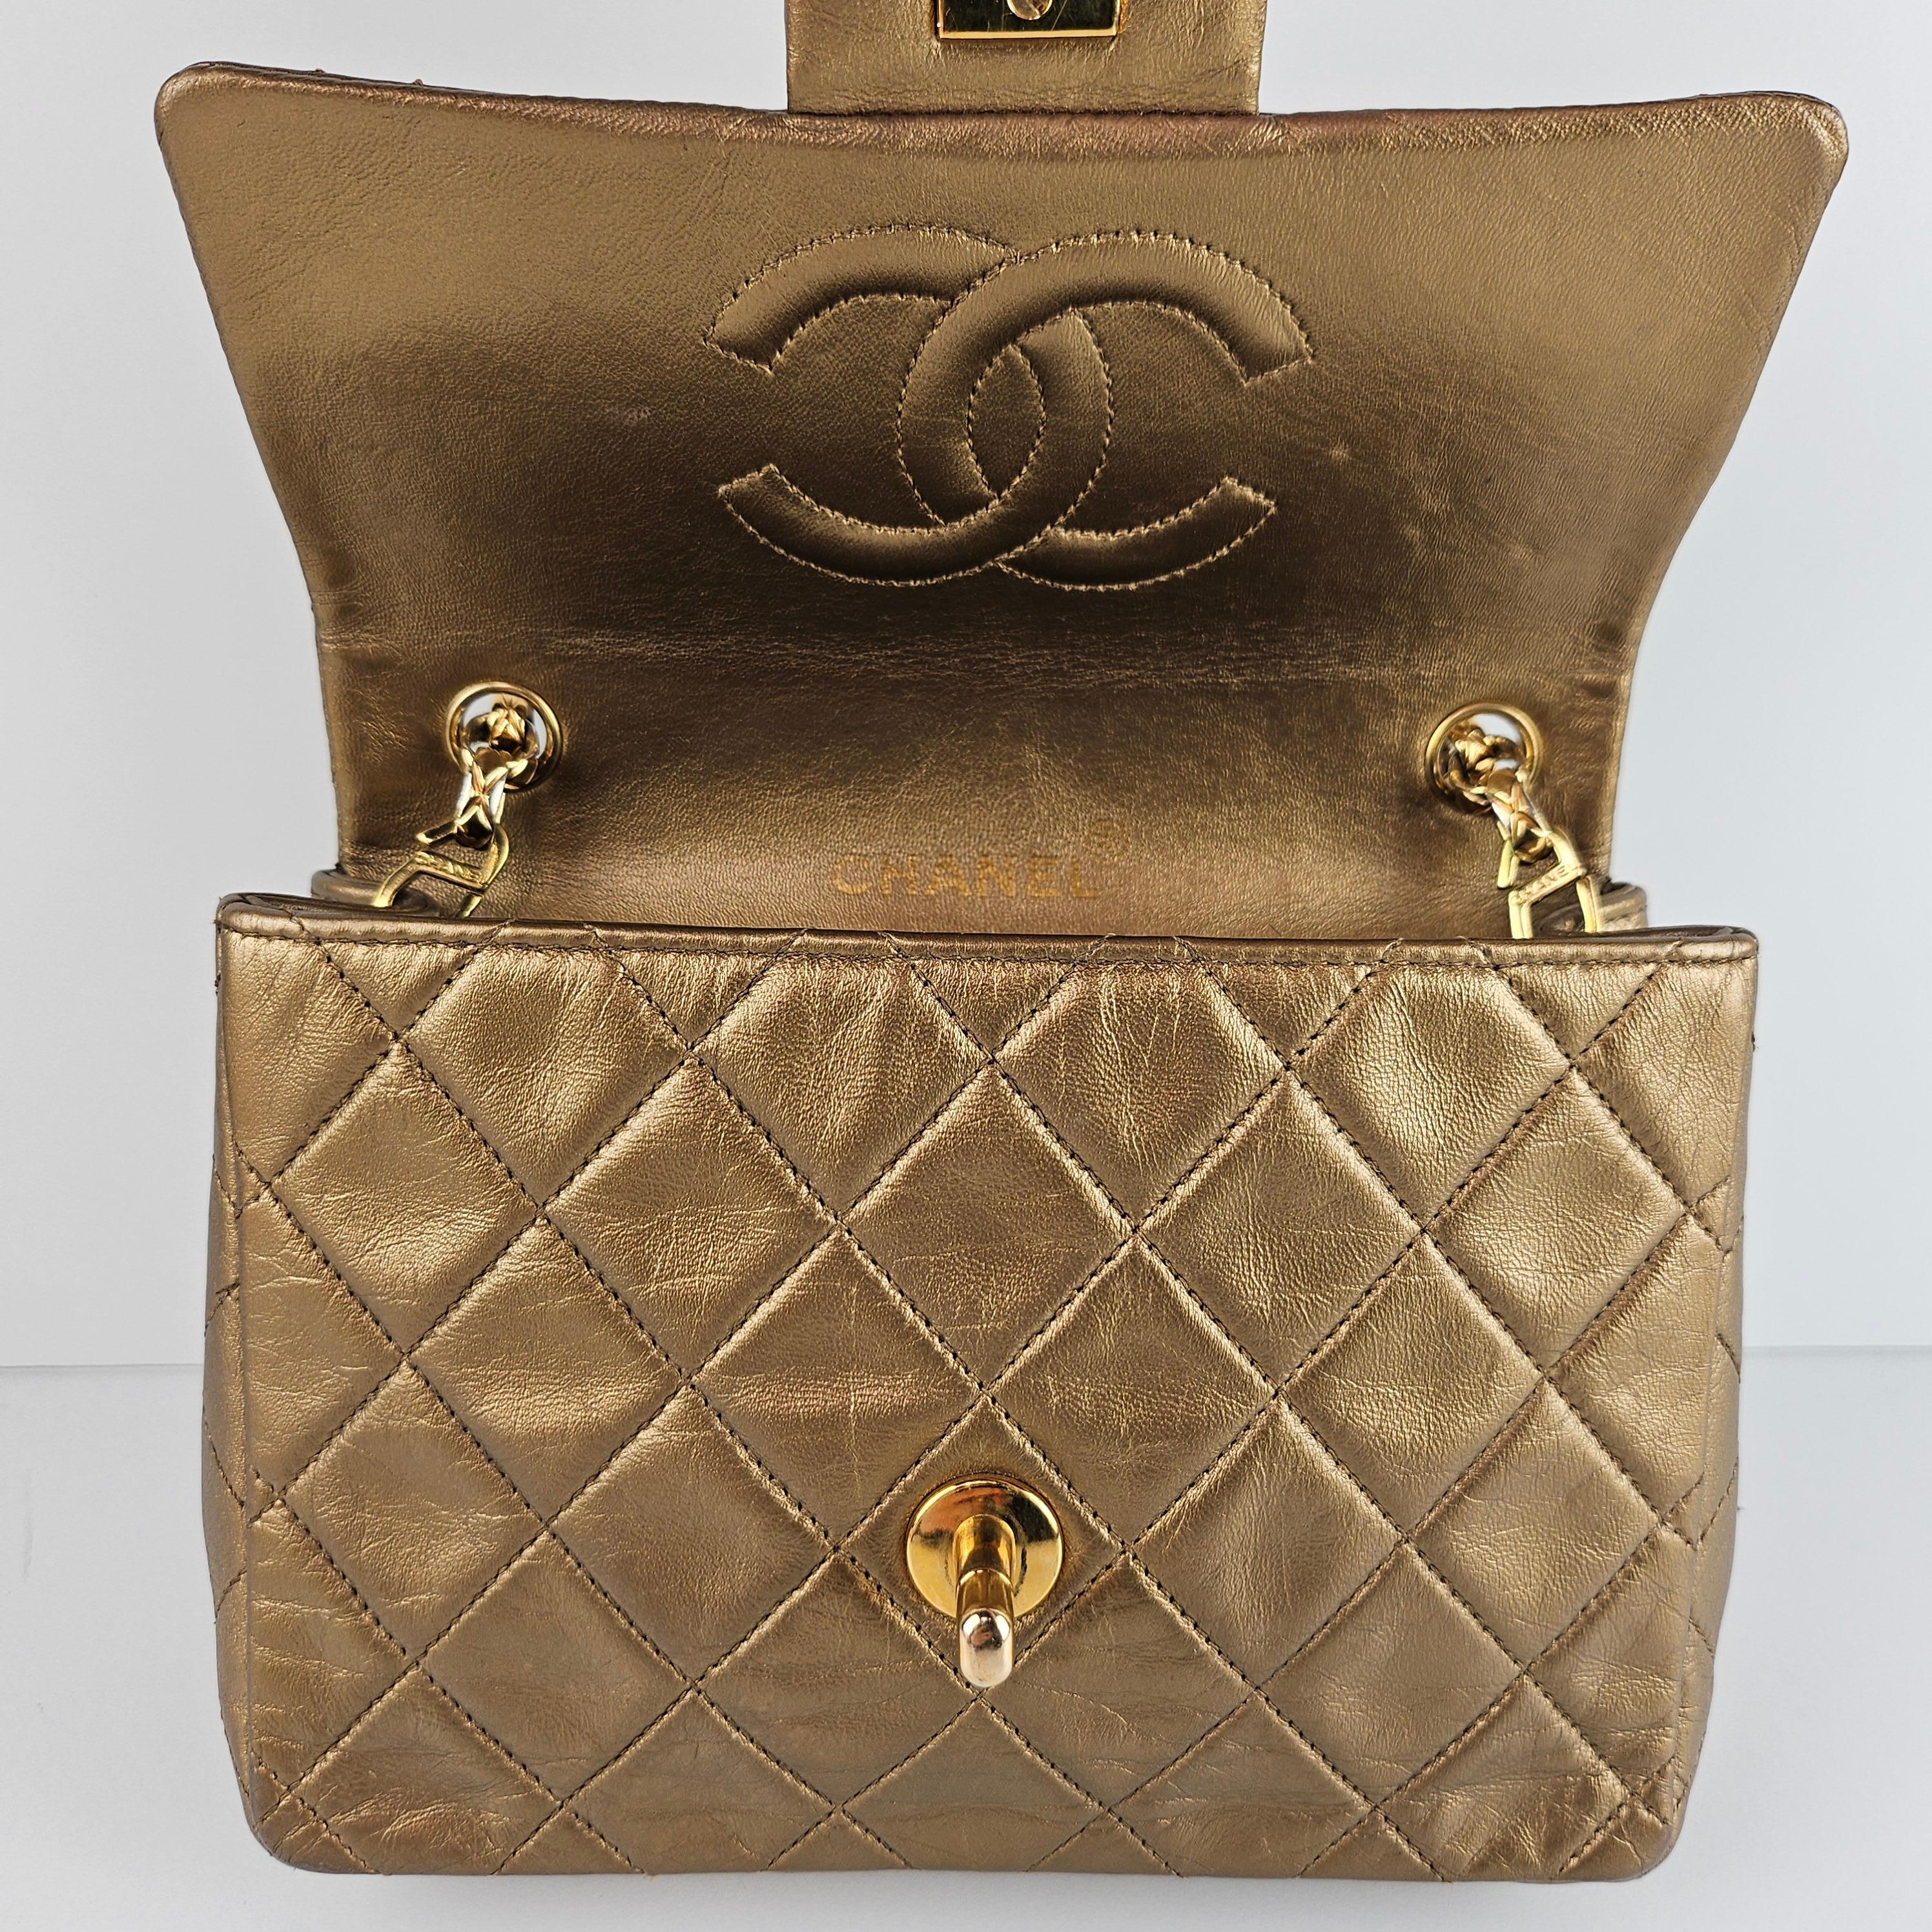 Chanel Vintage Quilted Metallic Gold Leather Bijoux Chain Mini Flap Bag 4